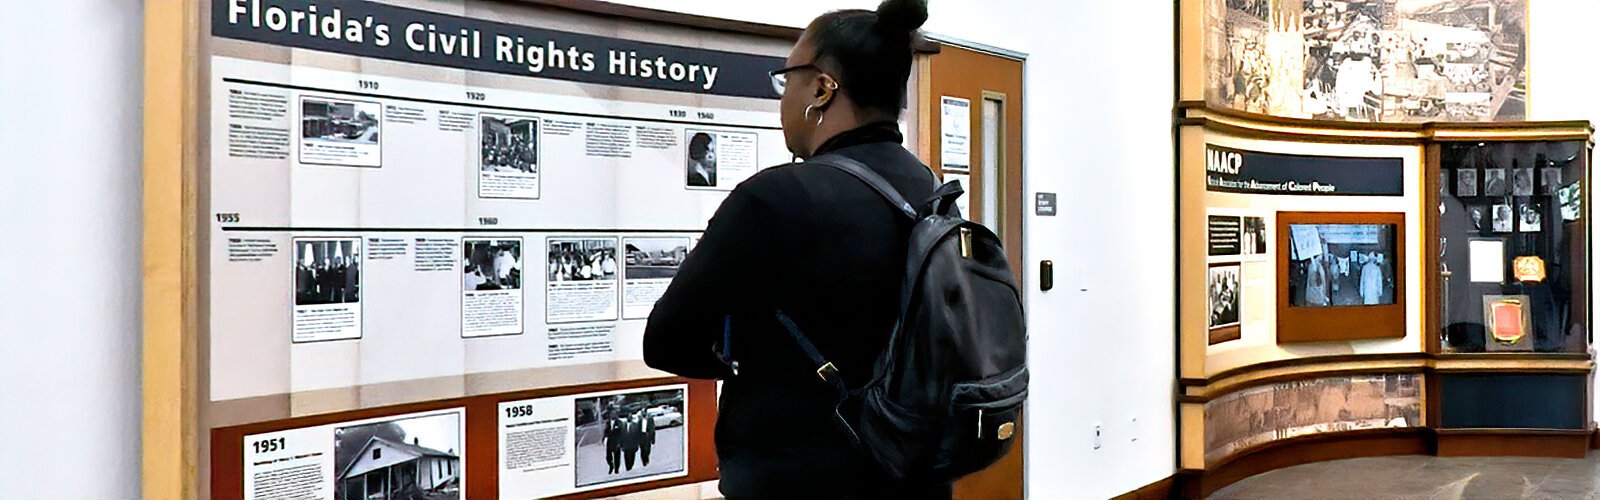 In the lobby of the Robert W. Saunders, Sr. Library, several museum-quality exhibits, including displays on the civil rights movement and the NAACP, can absorb visitors for hours